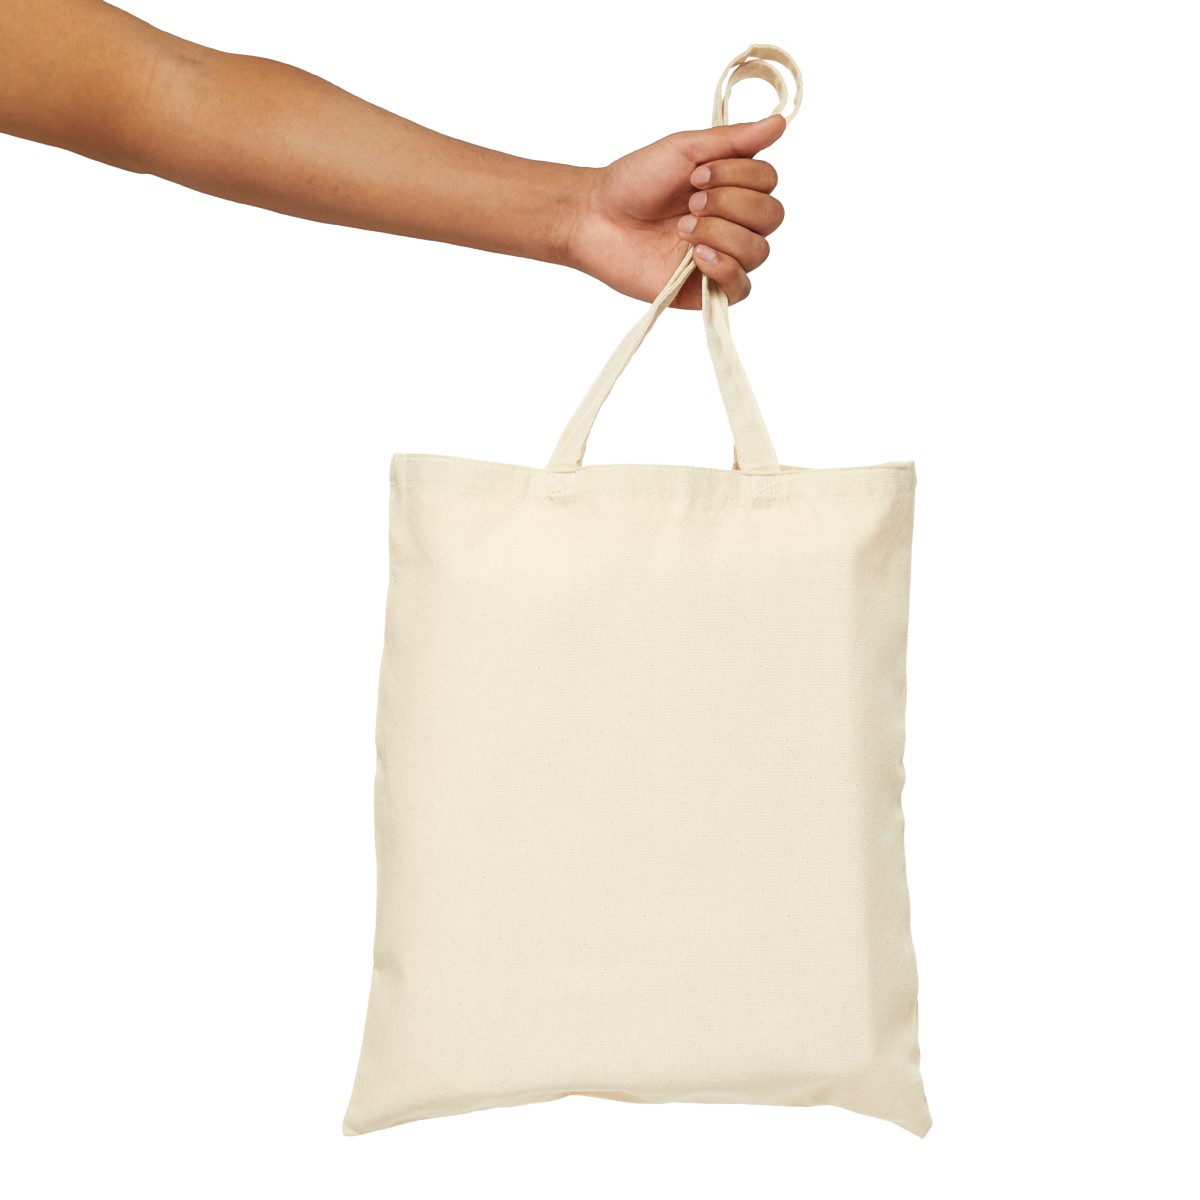 Ho Hos For Sanity 2024 (Cotton Canvas Tote Bag) product thumbnail image